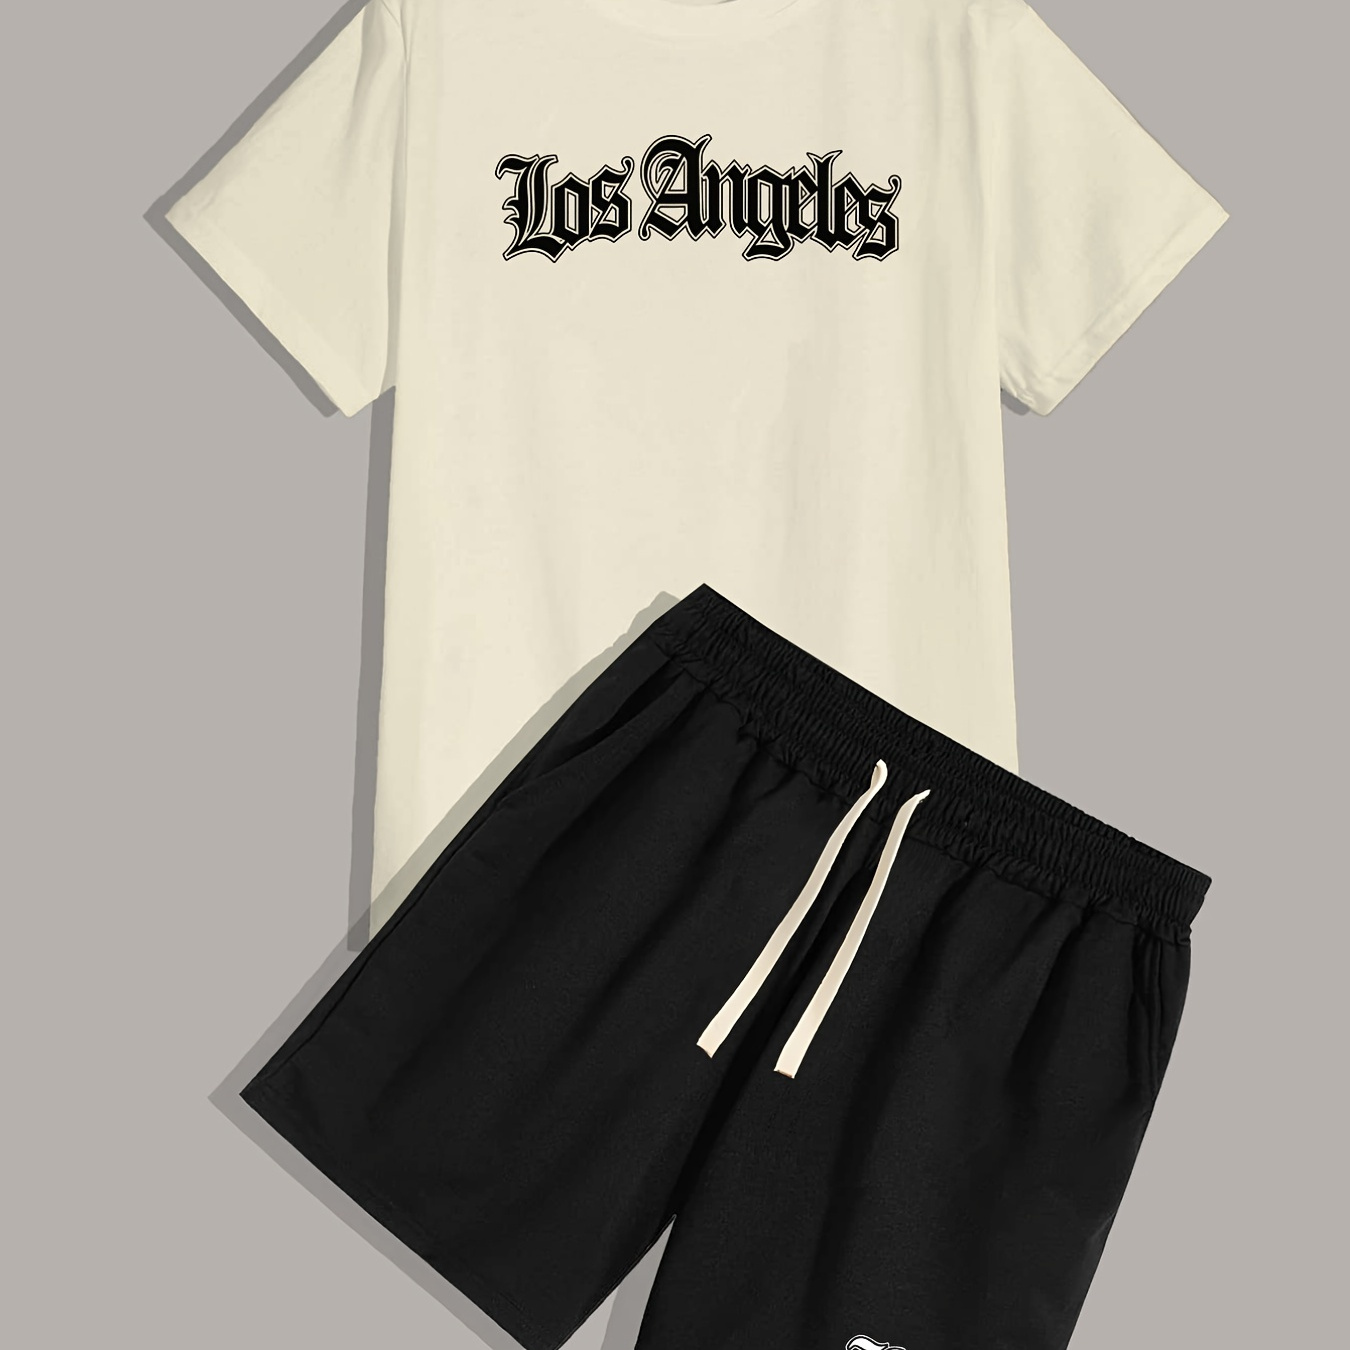 

Los Angeles, Men's 2 Pieces Outfits, Round Neck Short Sleeve T-shirt And Drawstring Shorts Set